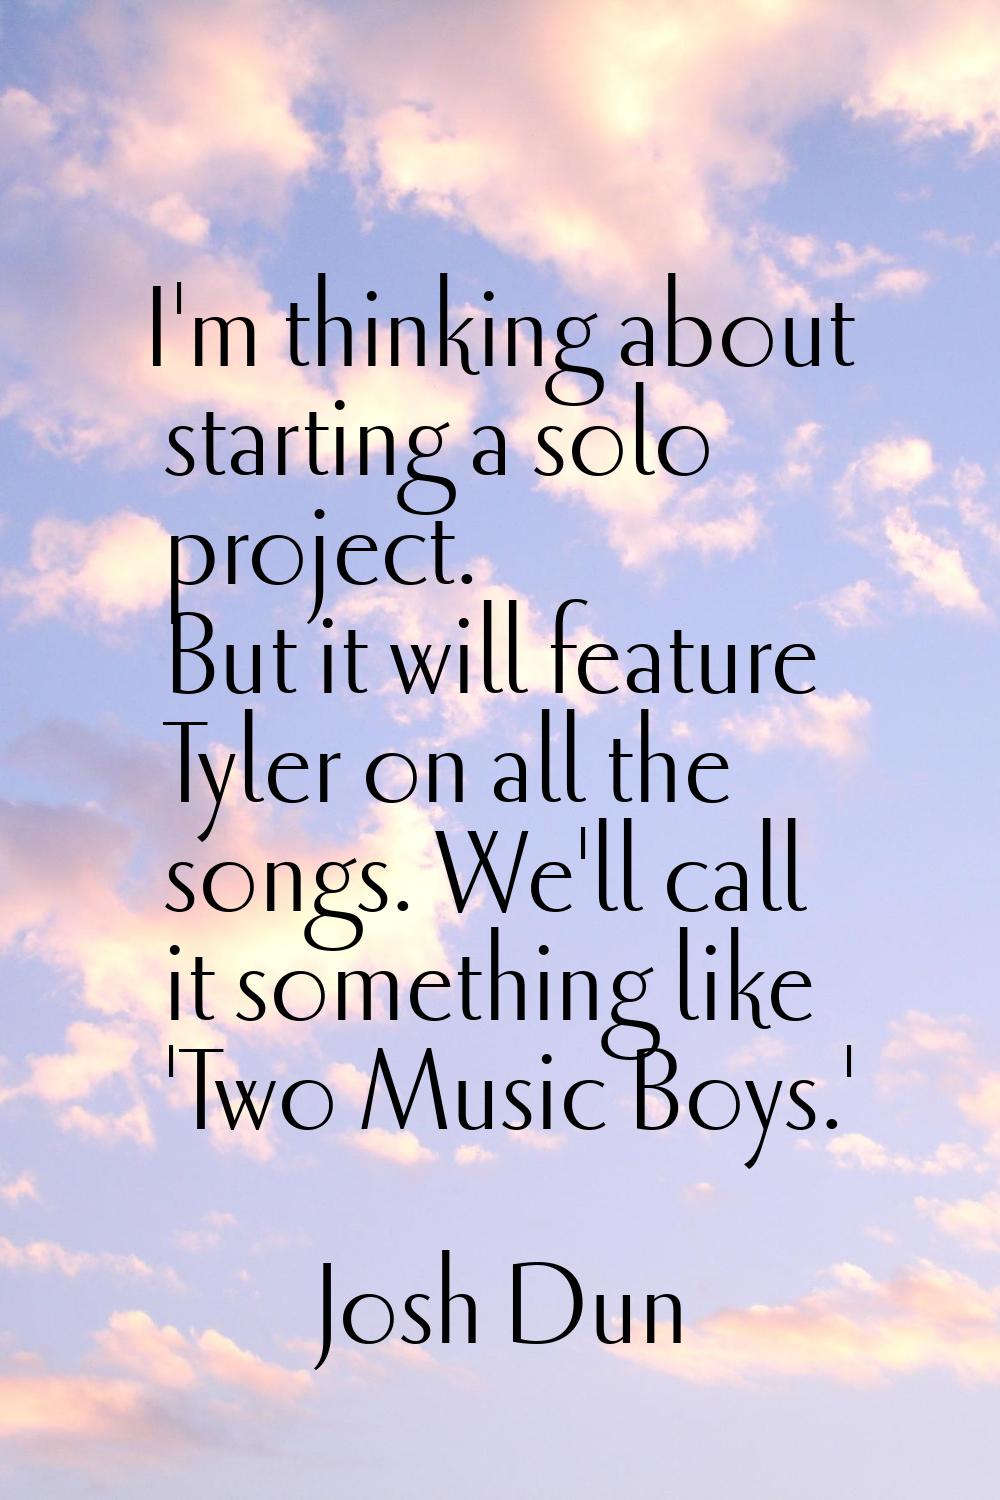 I'm thinking about starting a solo project. But it will feature Tyler on all the songs. We'll call 